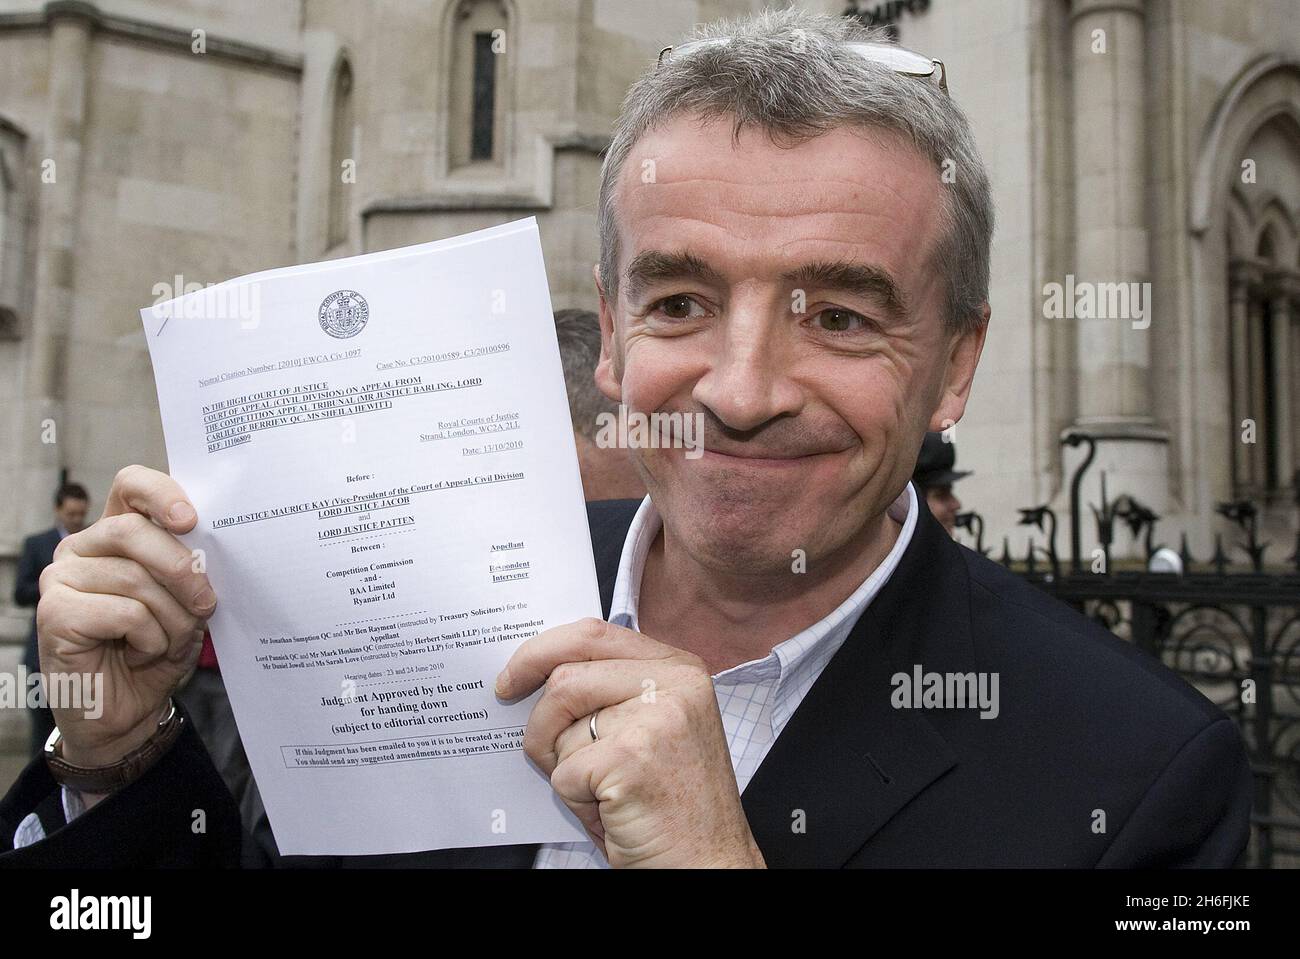 Ryan Air Boss Michael O'Leary pictured outside the High Court in London today after the court of appeal ruled that the BAA monopoly can now be broken up. The decision to dismiss the BAA monopoly's appeal against the Competition Commission's decision means that the sale of Glasgow and Stansted airports can now proceed, which will promote competition and a better deal for airport users and passengers. Stock Photo